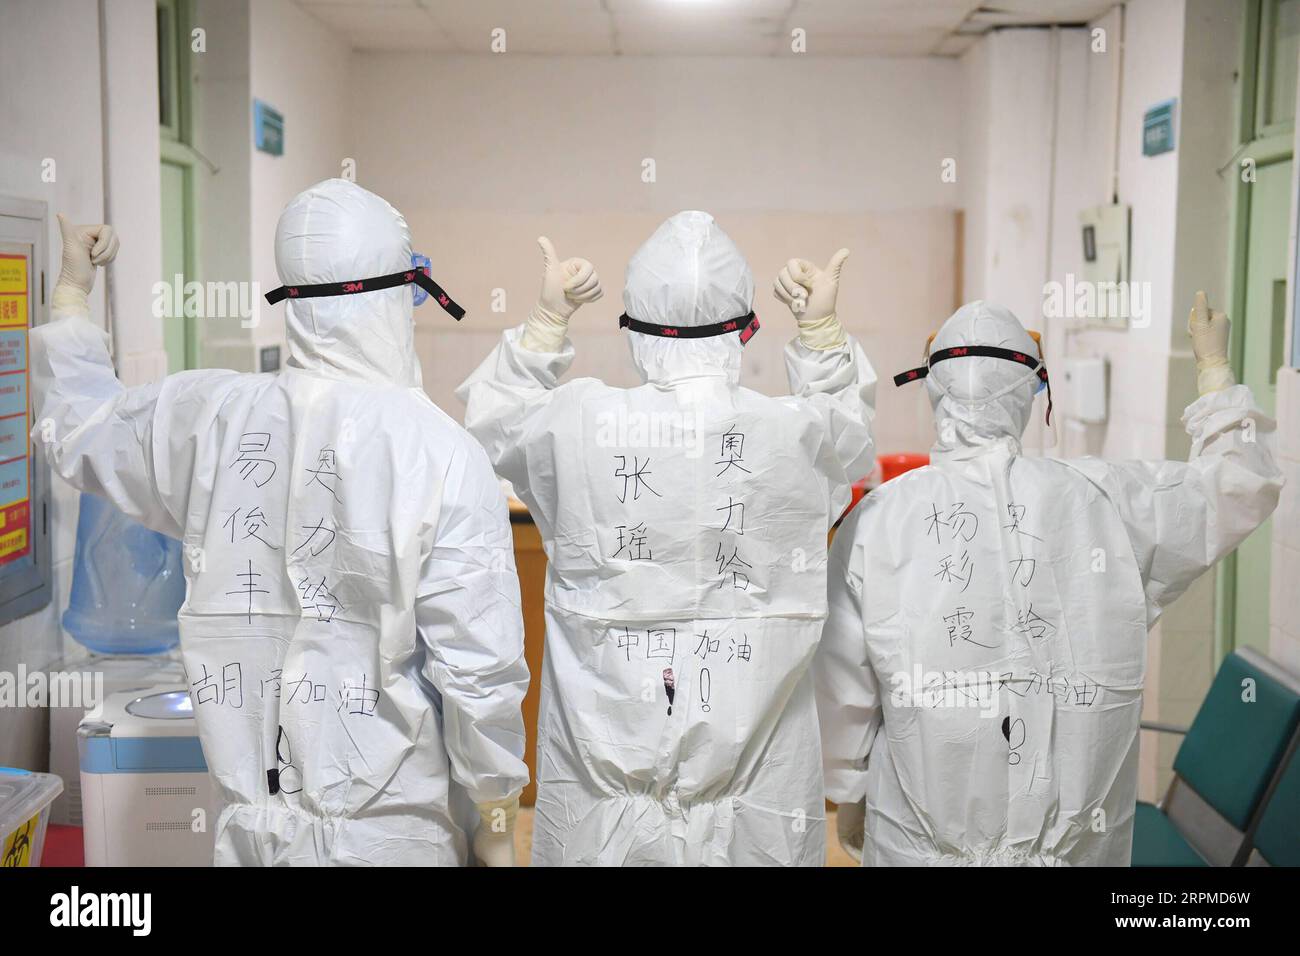 200209 -- CHANGSHA, Feb. 9, 2020 -- Yi Junfeng L, together with his colleagues Zhang Yao C and Yang Caixia, display handwritings on their protective suits in support of the battle against the novel coronavirus outbreak, at Hunan People s Hospital in Changsha, central China s Hunan Province, Feb. 7, 2020. Amid the current novel coronavirus outbreak, 22-year-old male nurse Yi Junfeng has volunteered to join the battle against the epidemic. After a series of professional trainings, he now works as a front-line fever clinic nurse at Hunan People s Hospital in Changsha. Yi believes that a male nurs Stock Photo